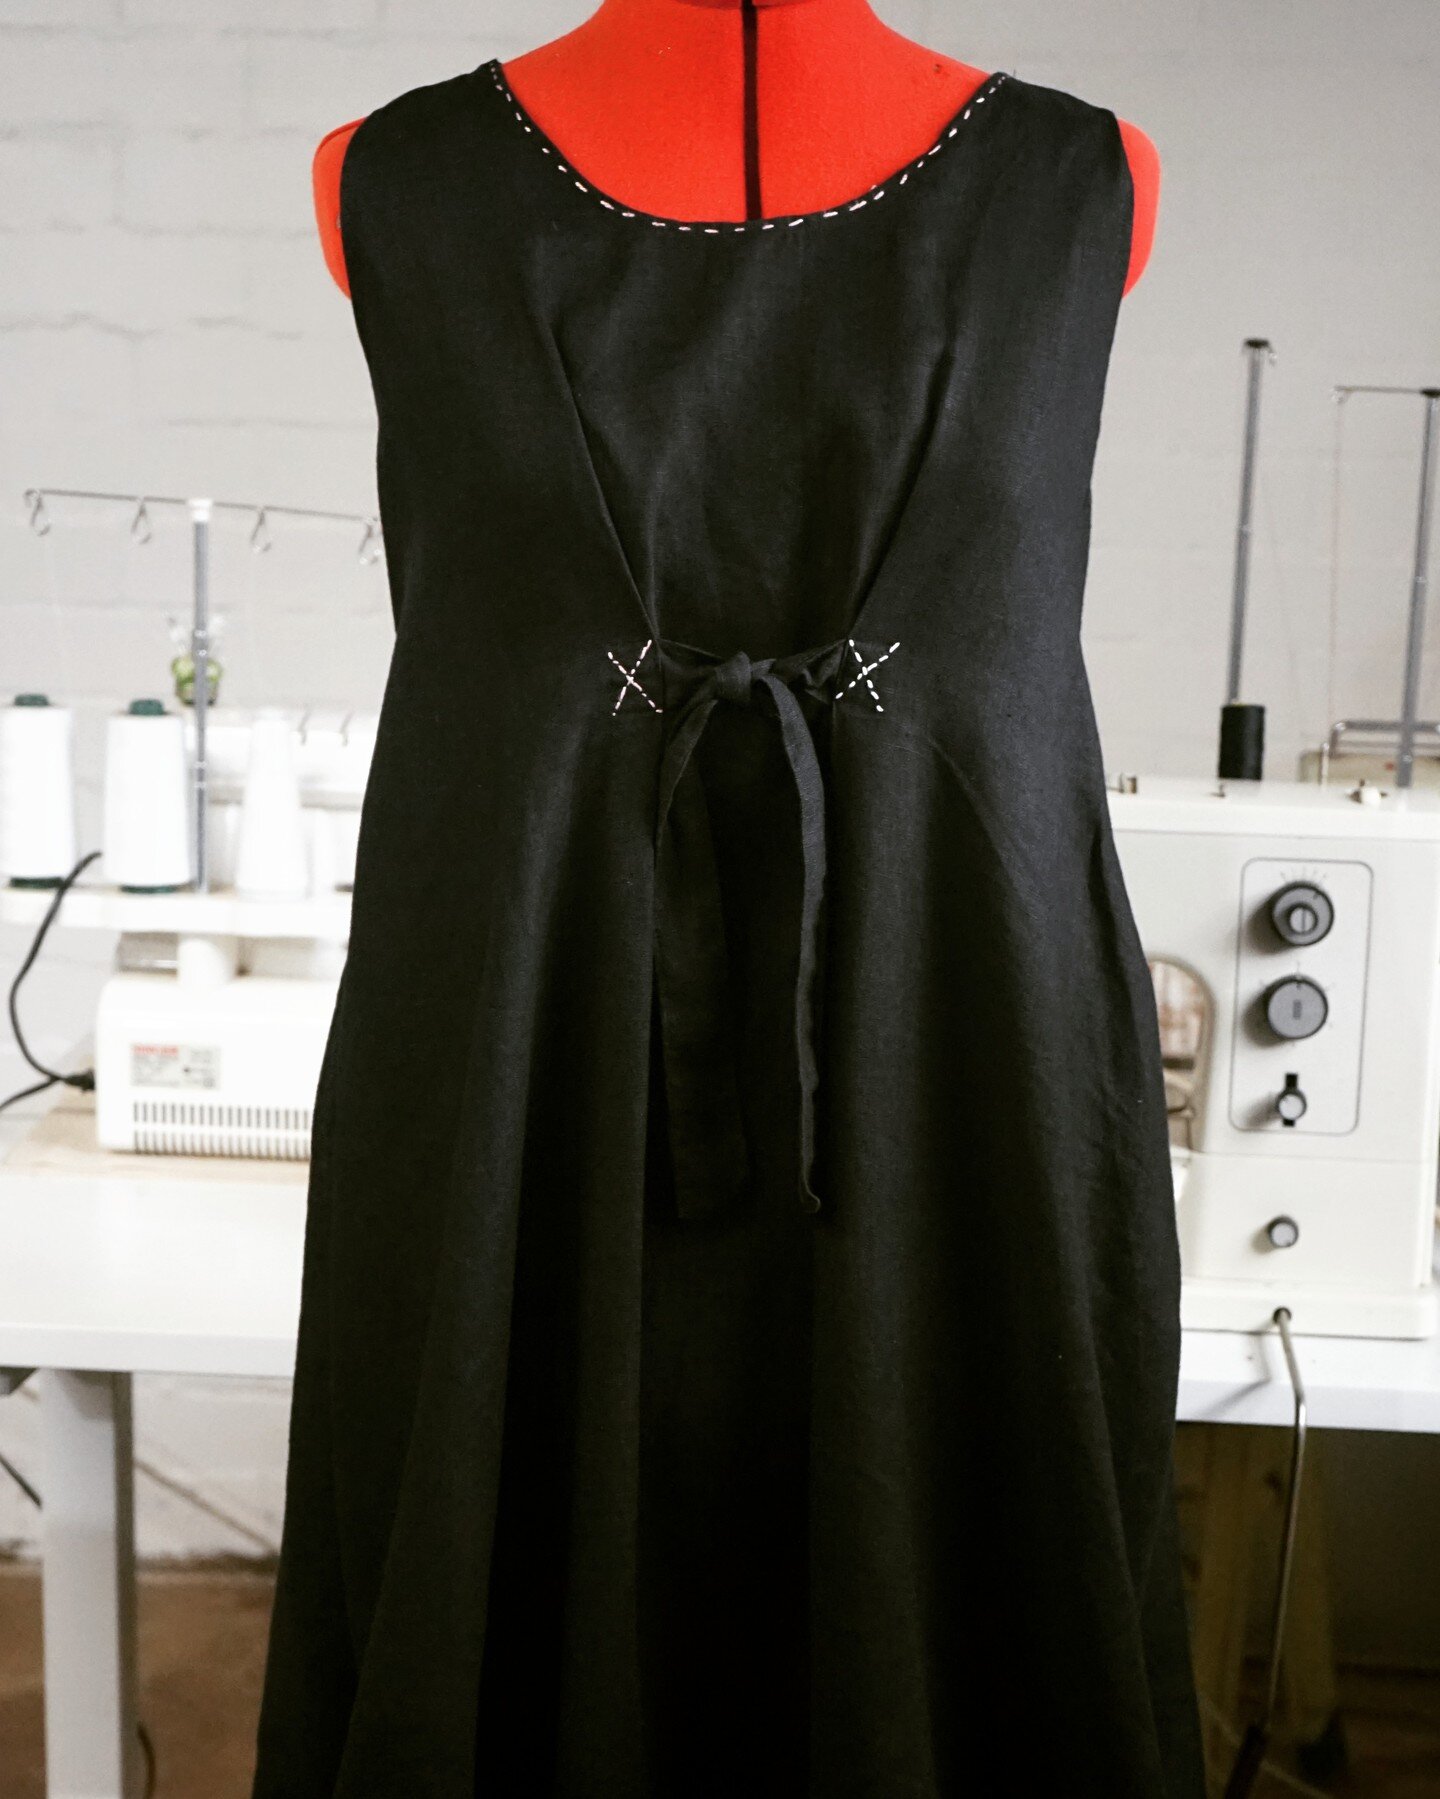 I made three of these dresses, because they look more complicated to make than they really are. This is black linen with a bit of sashiko stitching - cool to wear in summer or over a tee shirt when the temperatures go down.
#memadewardrobe #sewers of